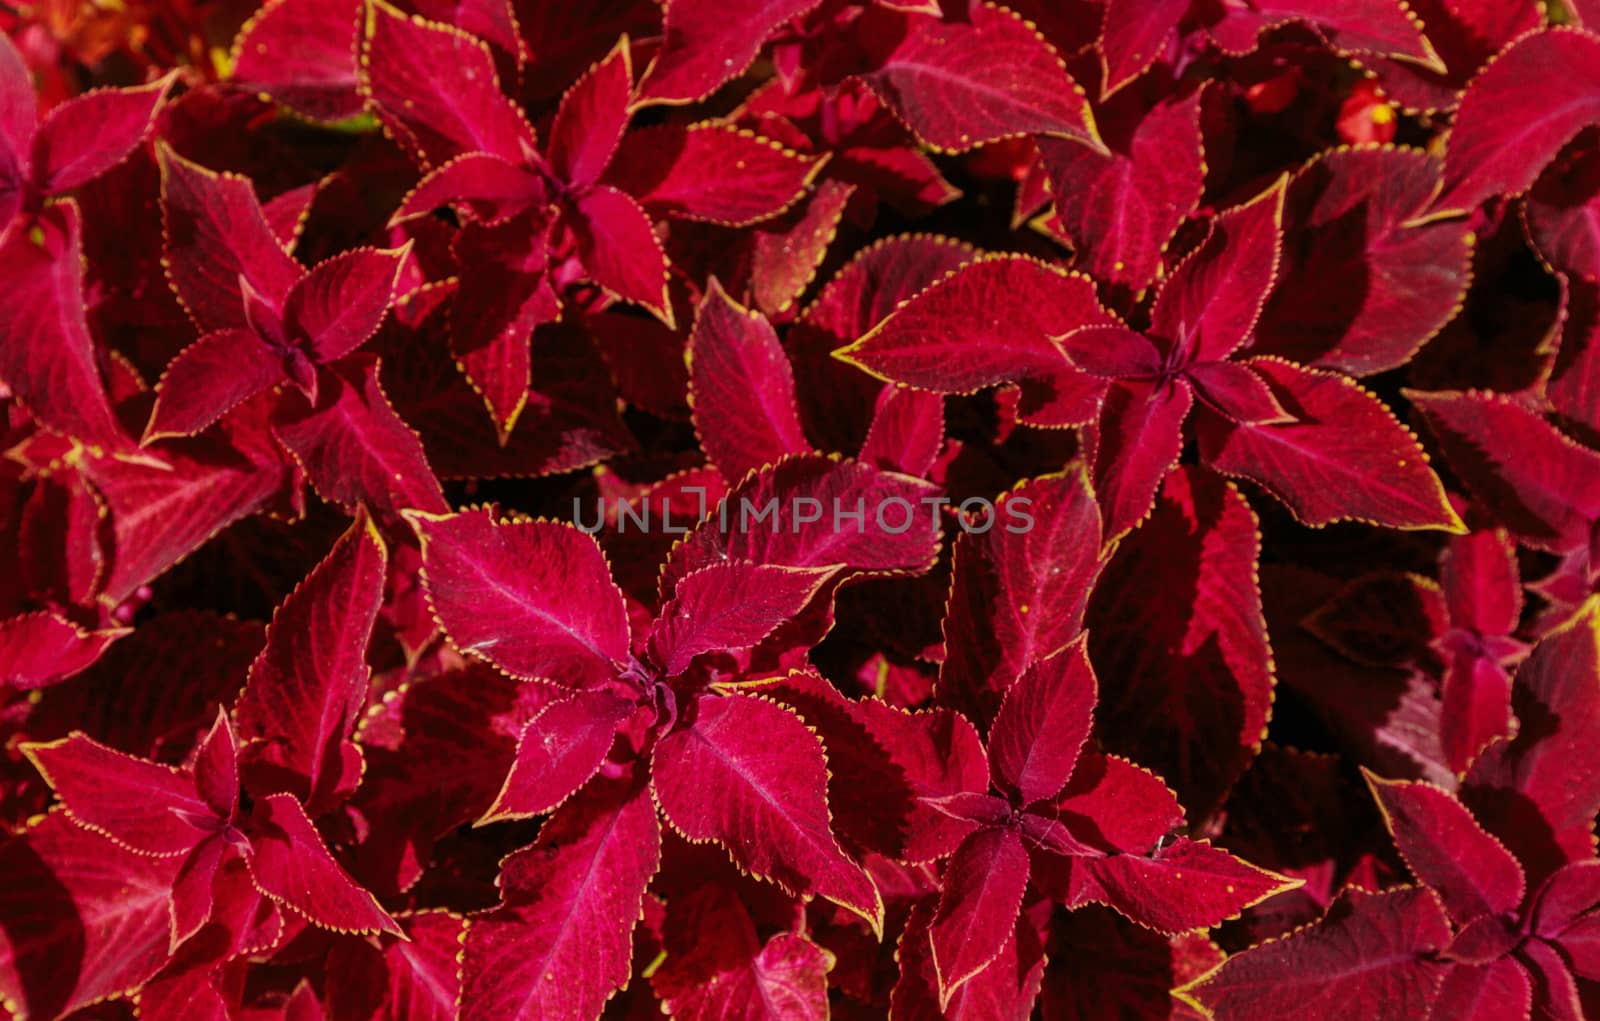 Decorative lawn leaves, Creative layout made of red foliage, abstract nature background